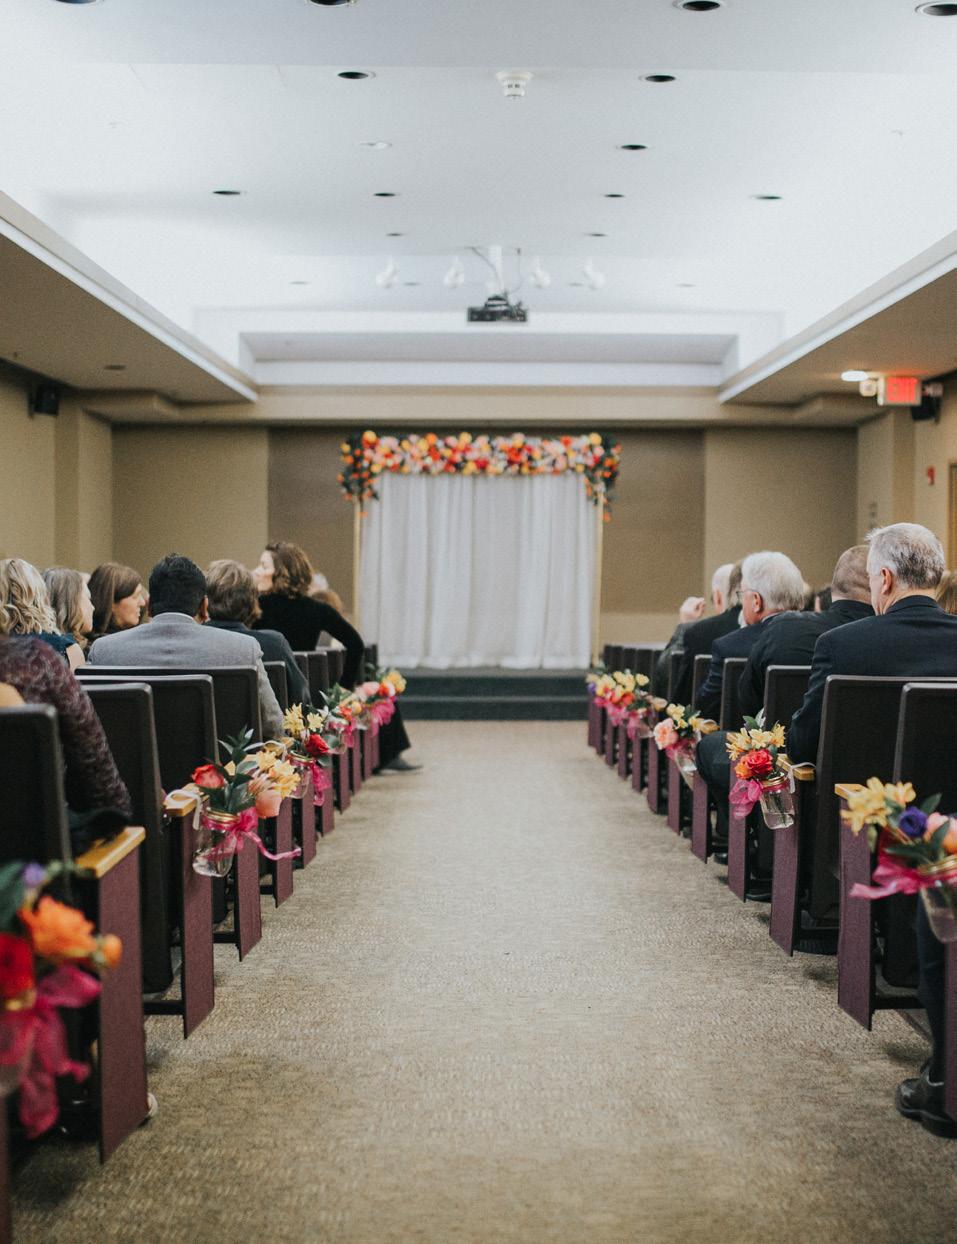 CLASSIC SWEETHEART CEREMONY AND RECEPTION PACKAGE Total: $3,350 ($3,000 for Fridays, Sundays and weddings booked January through March) Louise C.